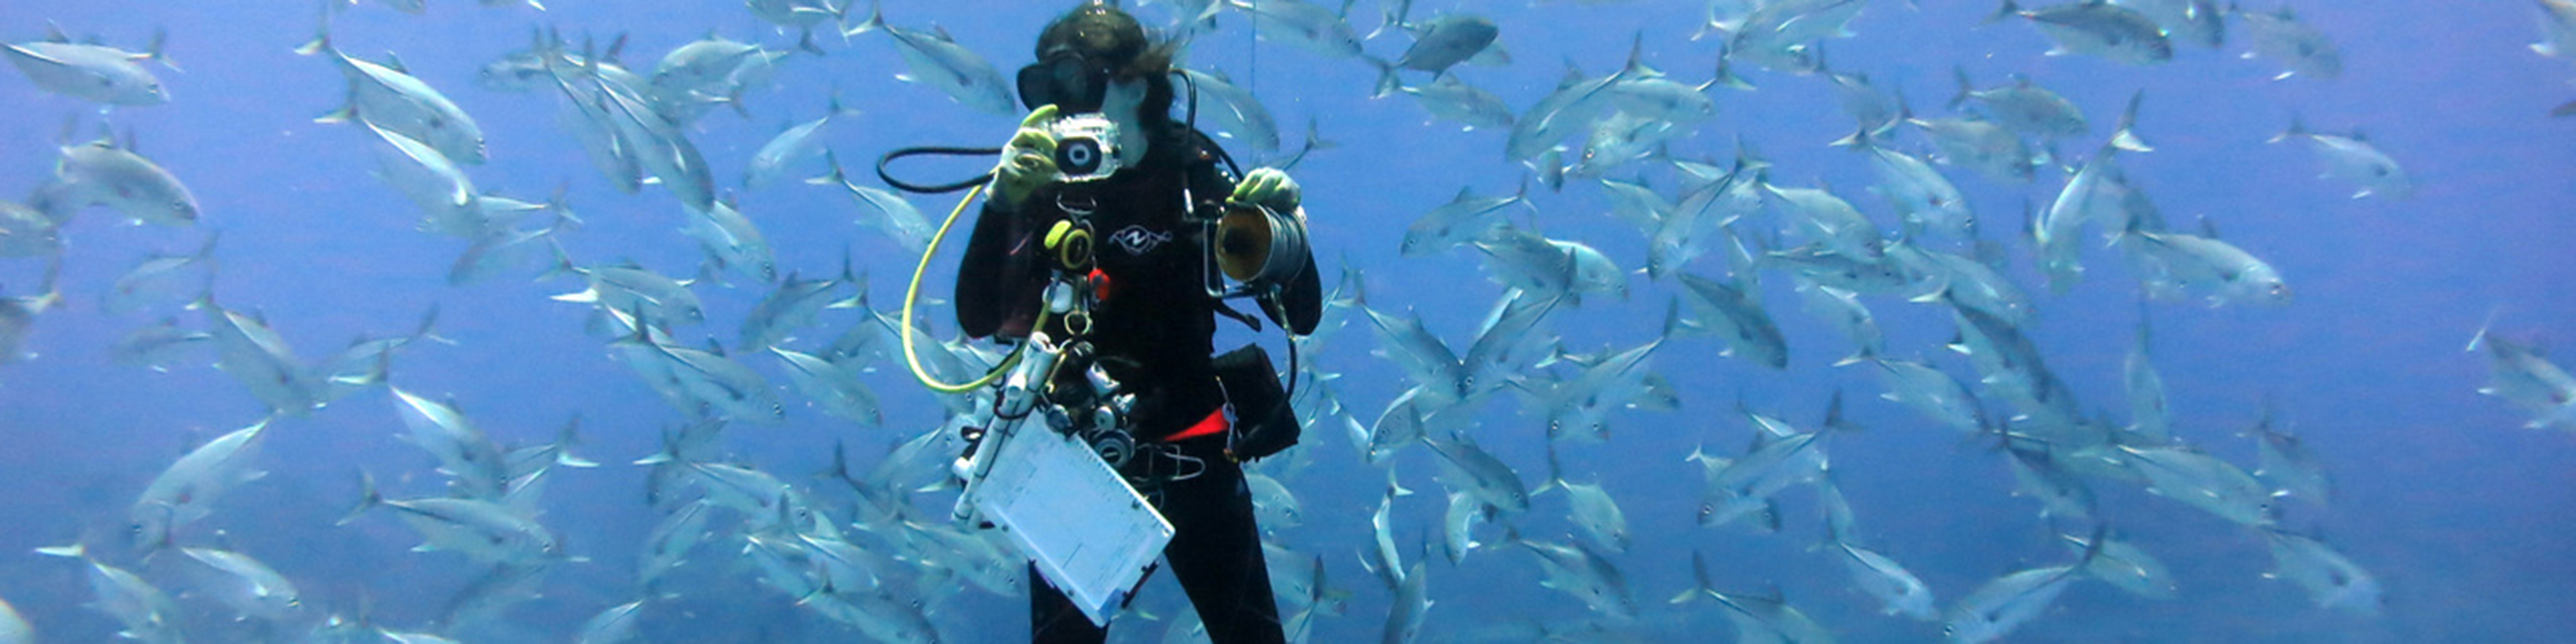 marine biologist under wear in scuba gear holding a clipboard and other equipment while in the middle of a swarming school of fish